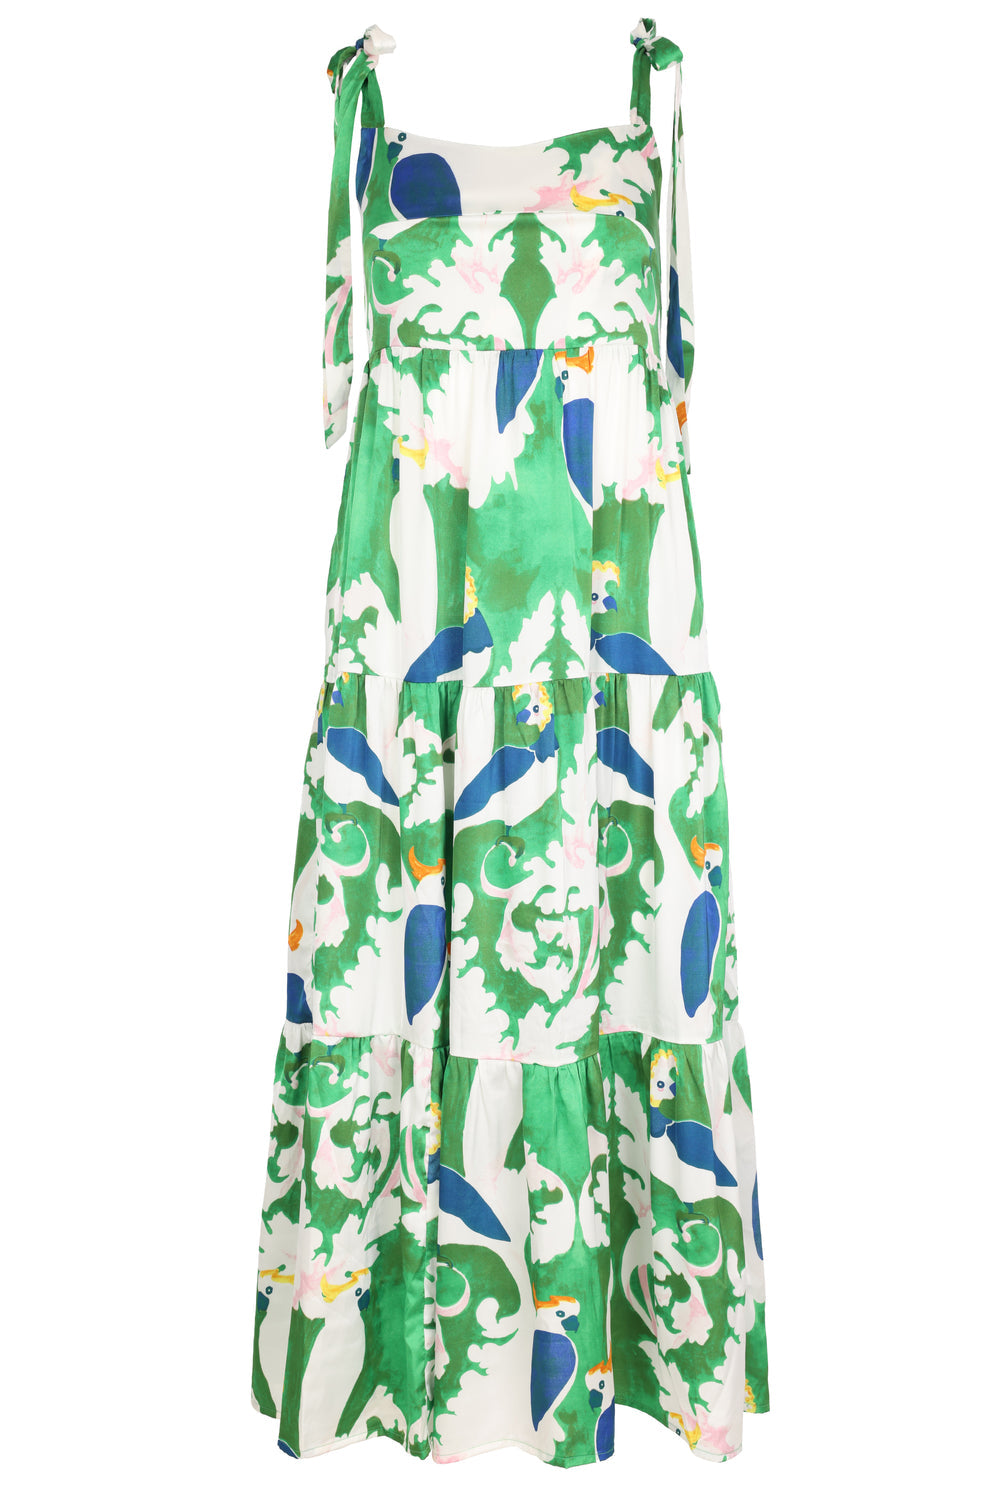 Traffic People - Parrot Green Lily Dress